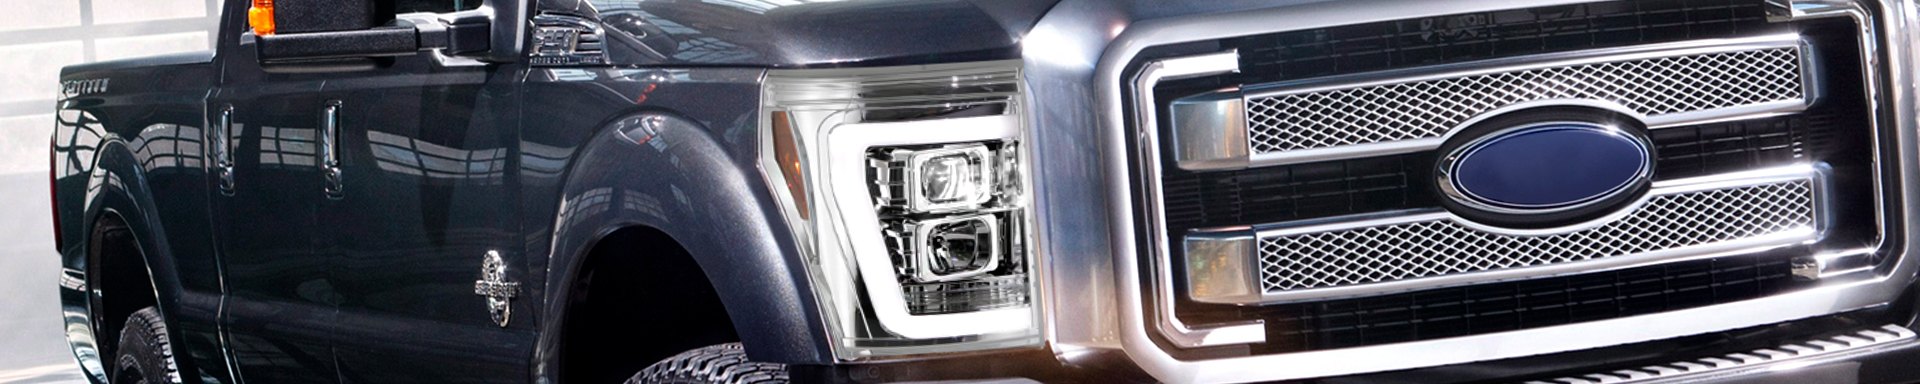 New Line Of Spyder LED Headlights For Refined Look Of Your Ford F-Series Truck 